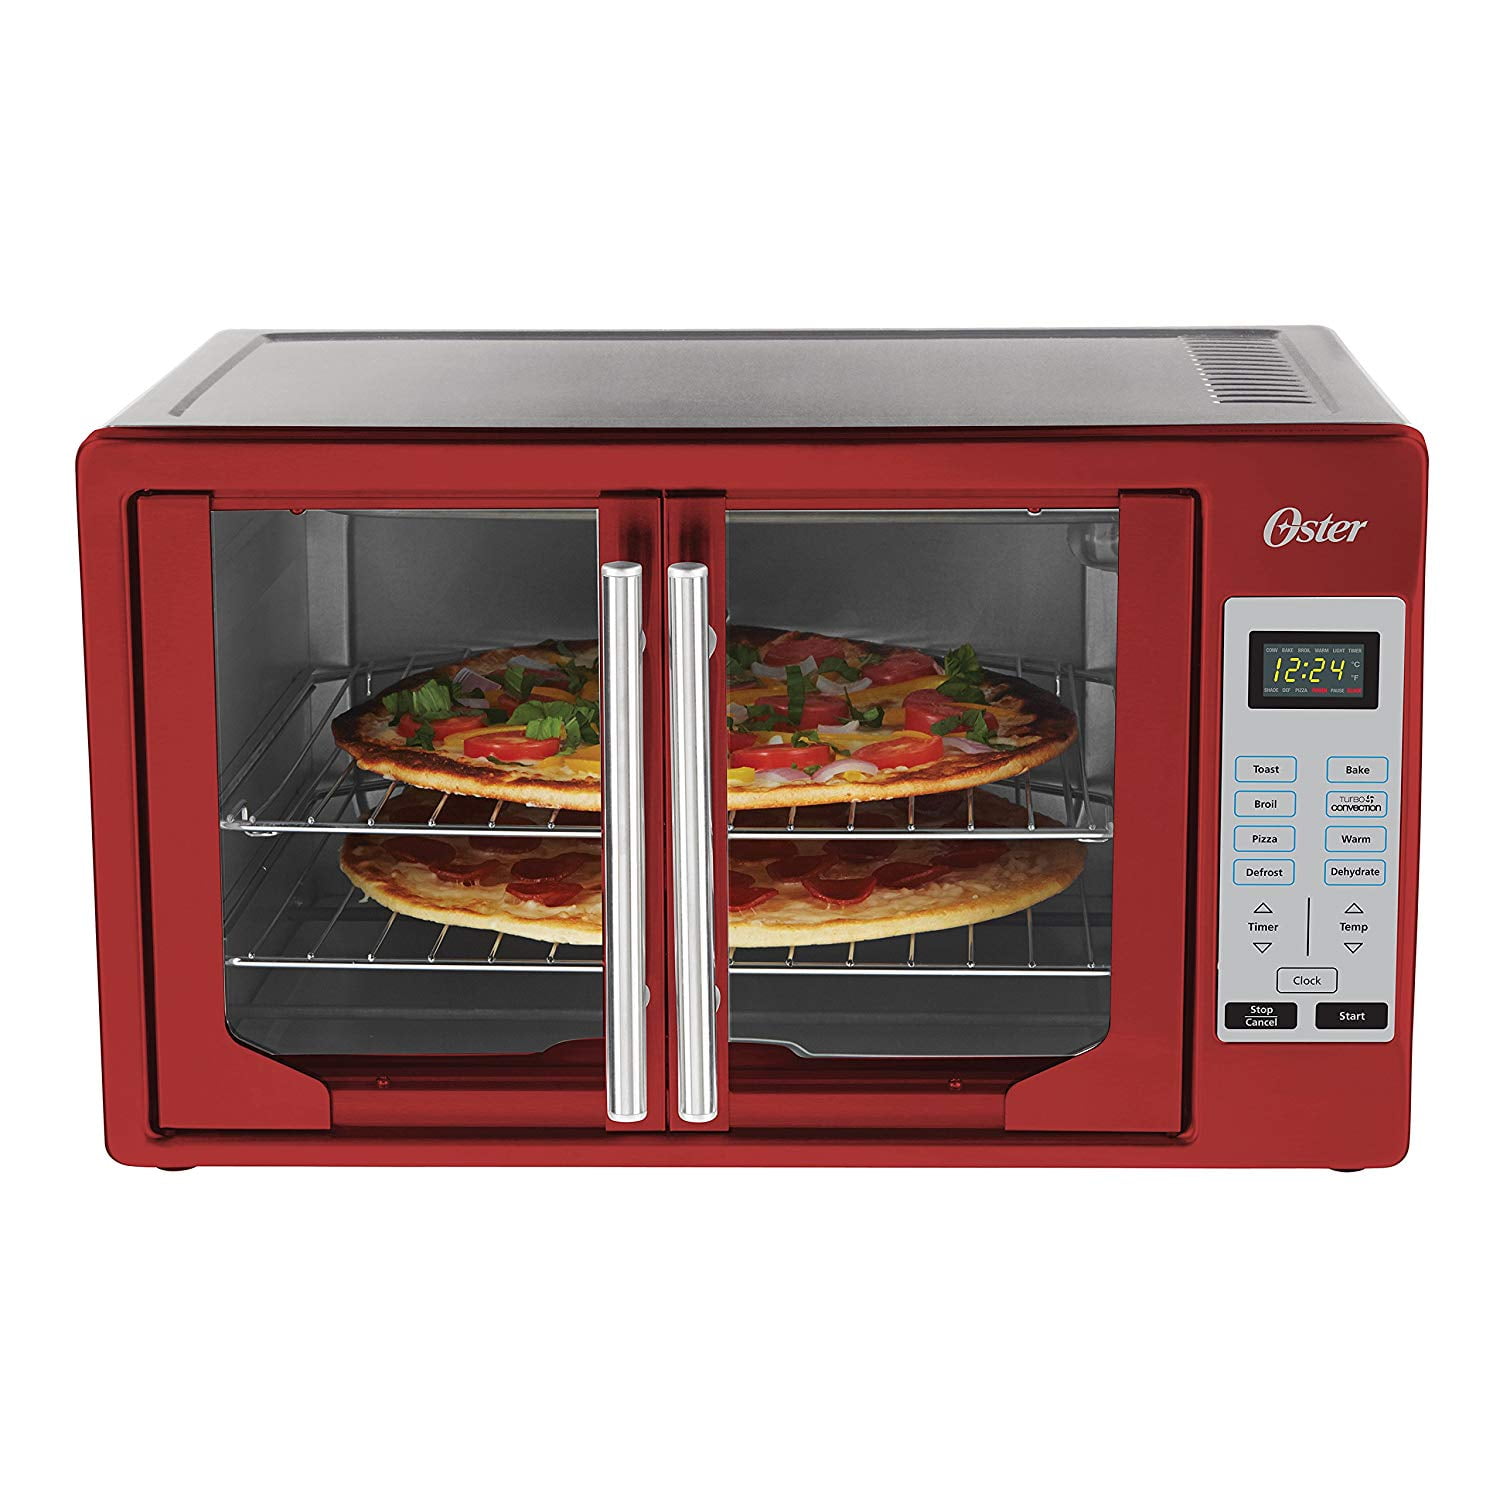 Oster TSSTTVFDDG-R French Door Toaster Oven, Extra Large, Red - Walmart